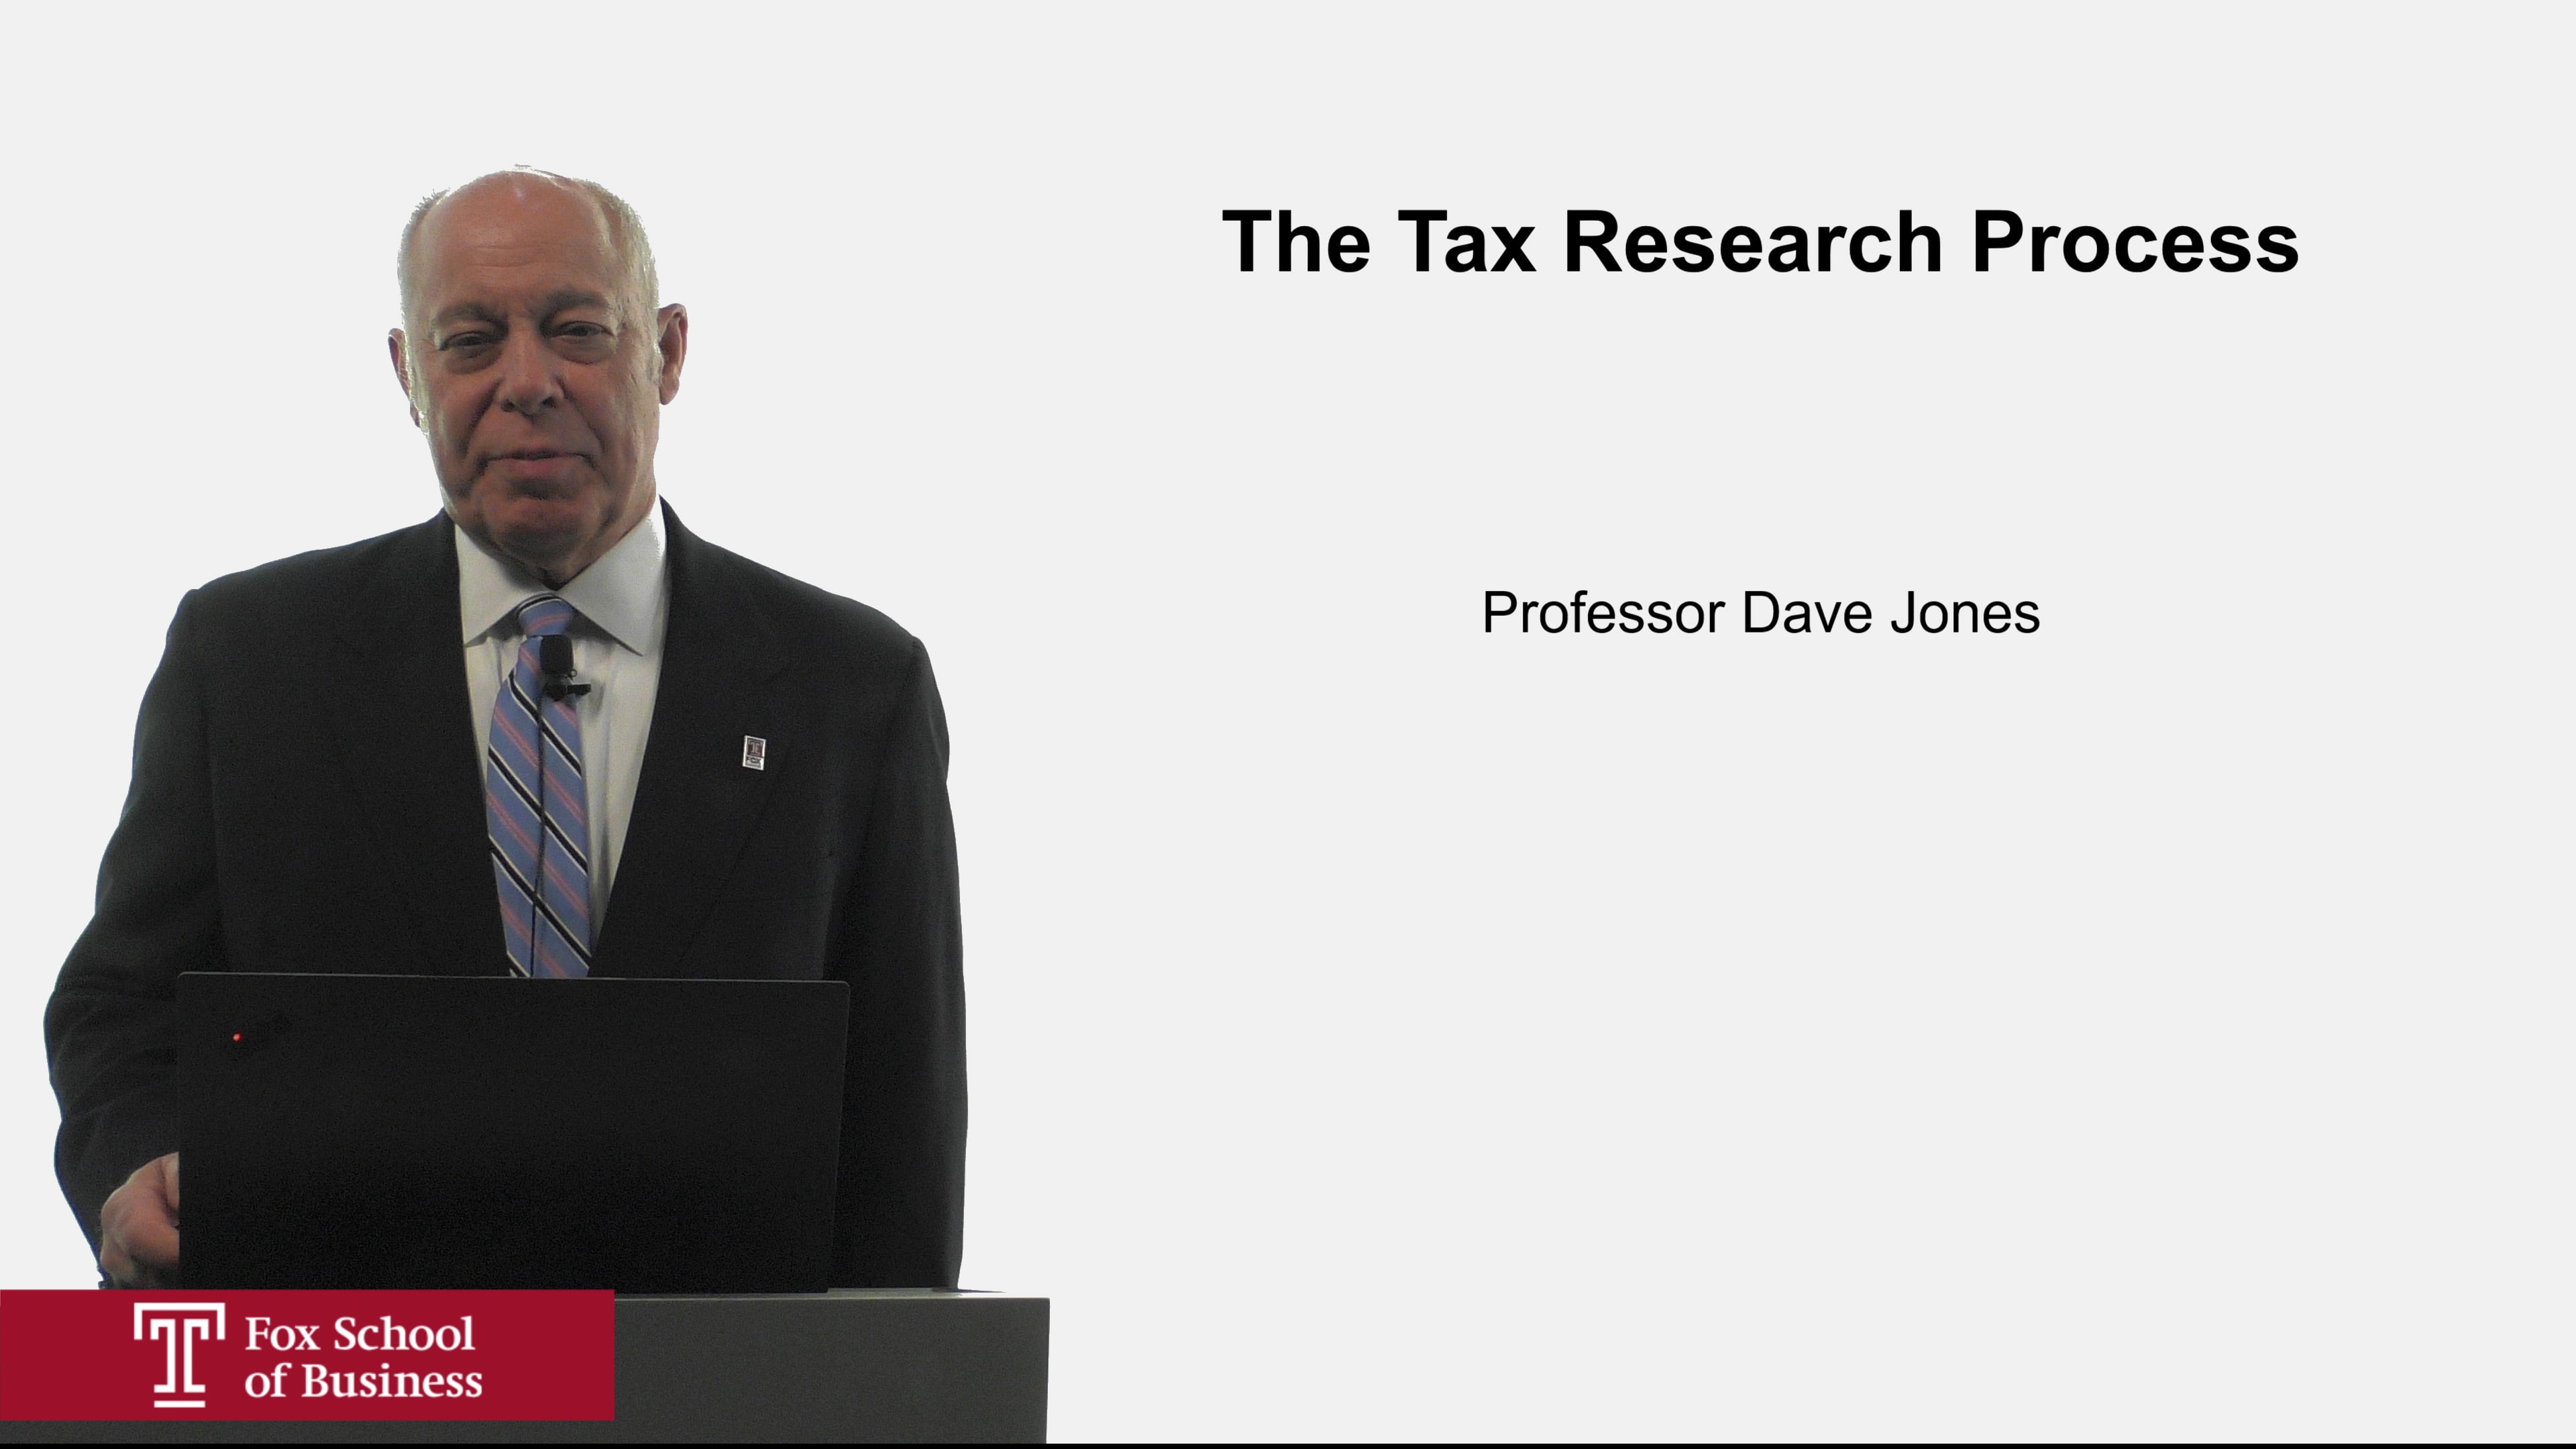 The Tax Research Process